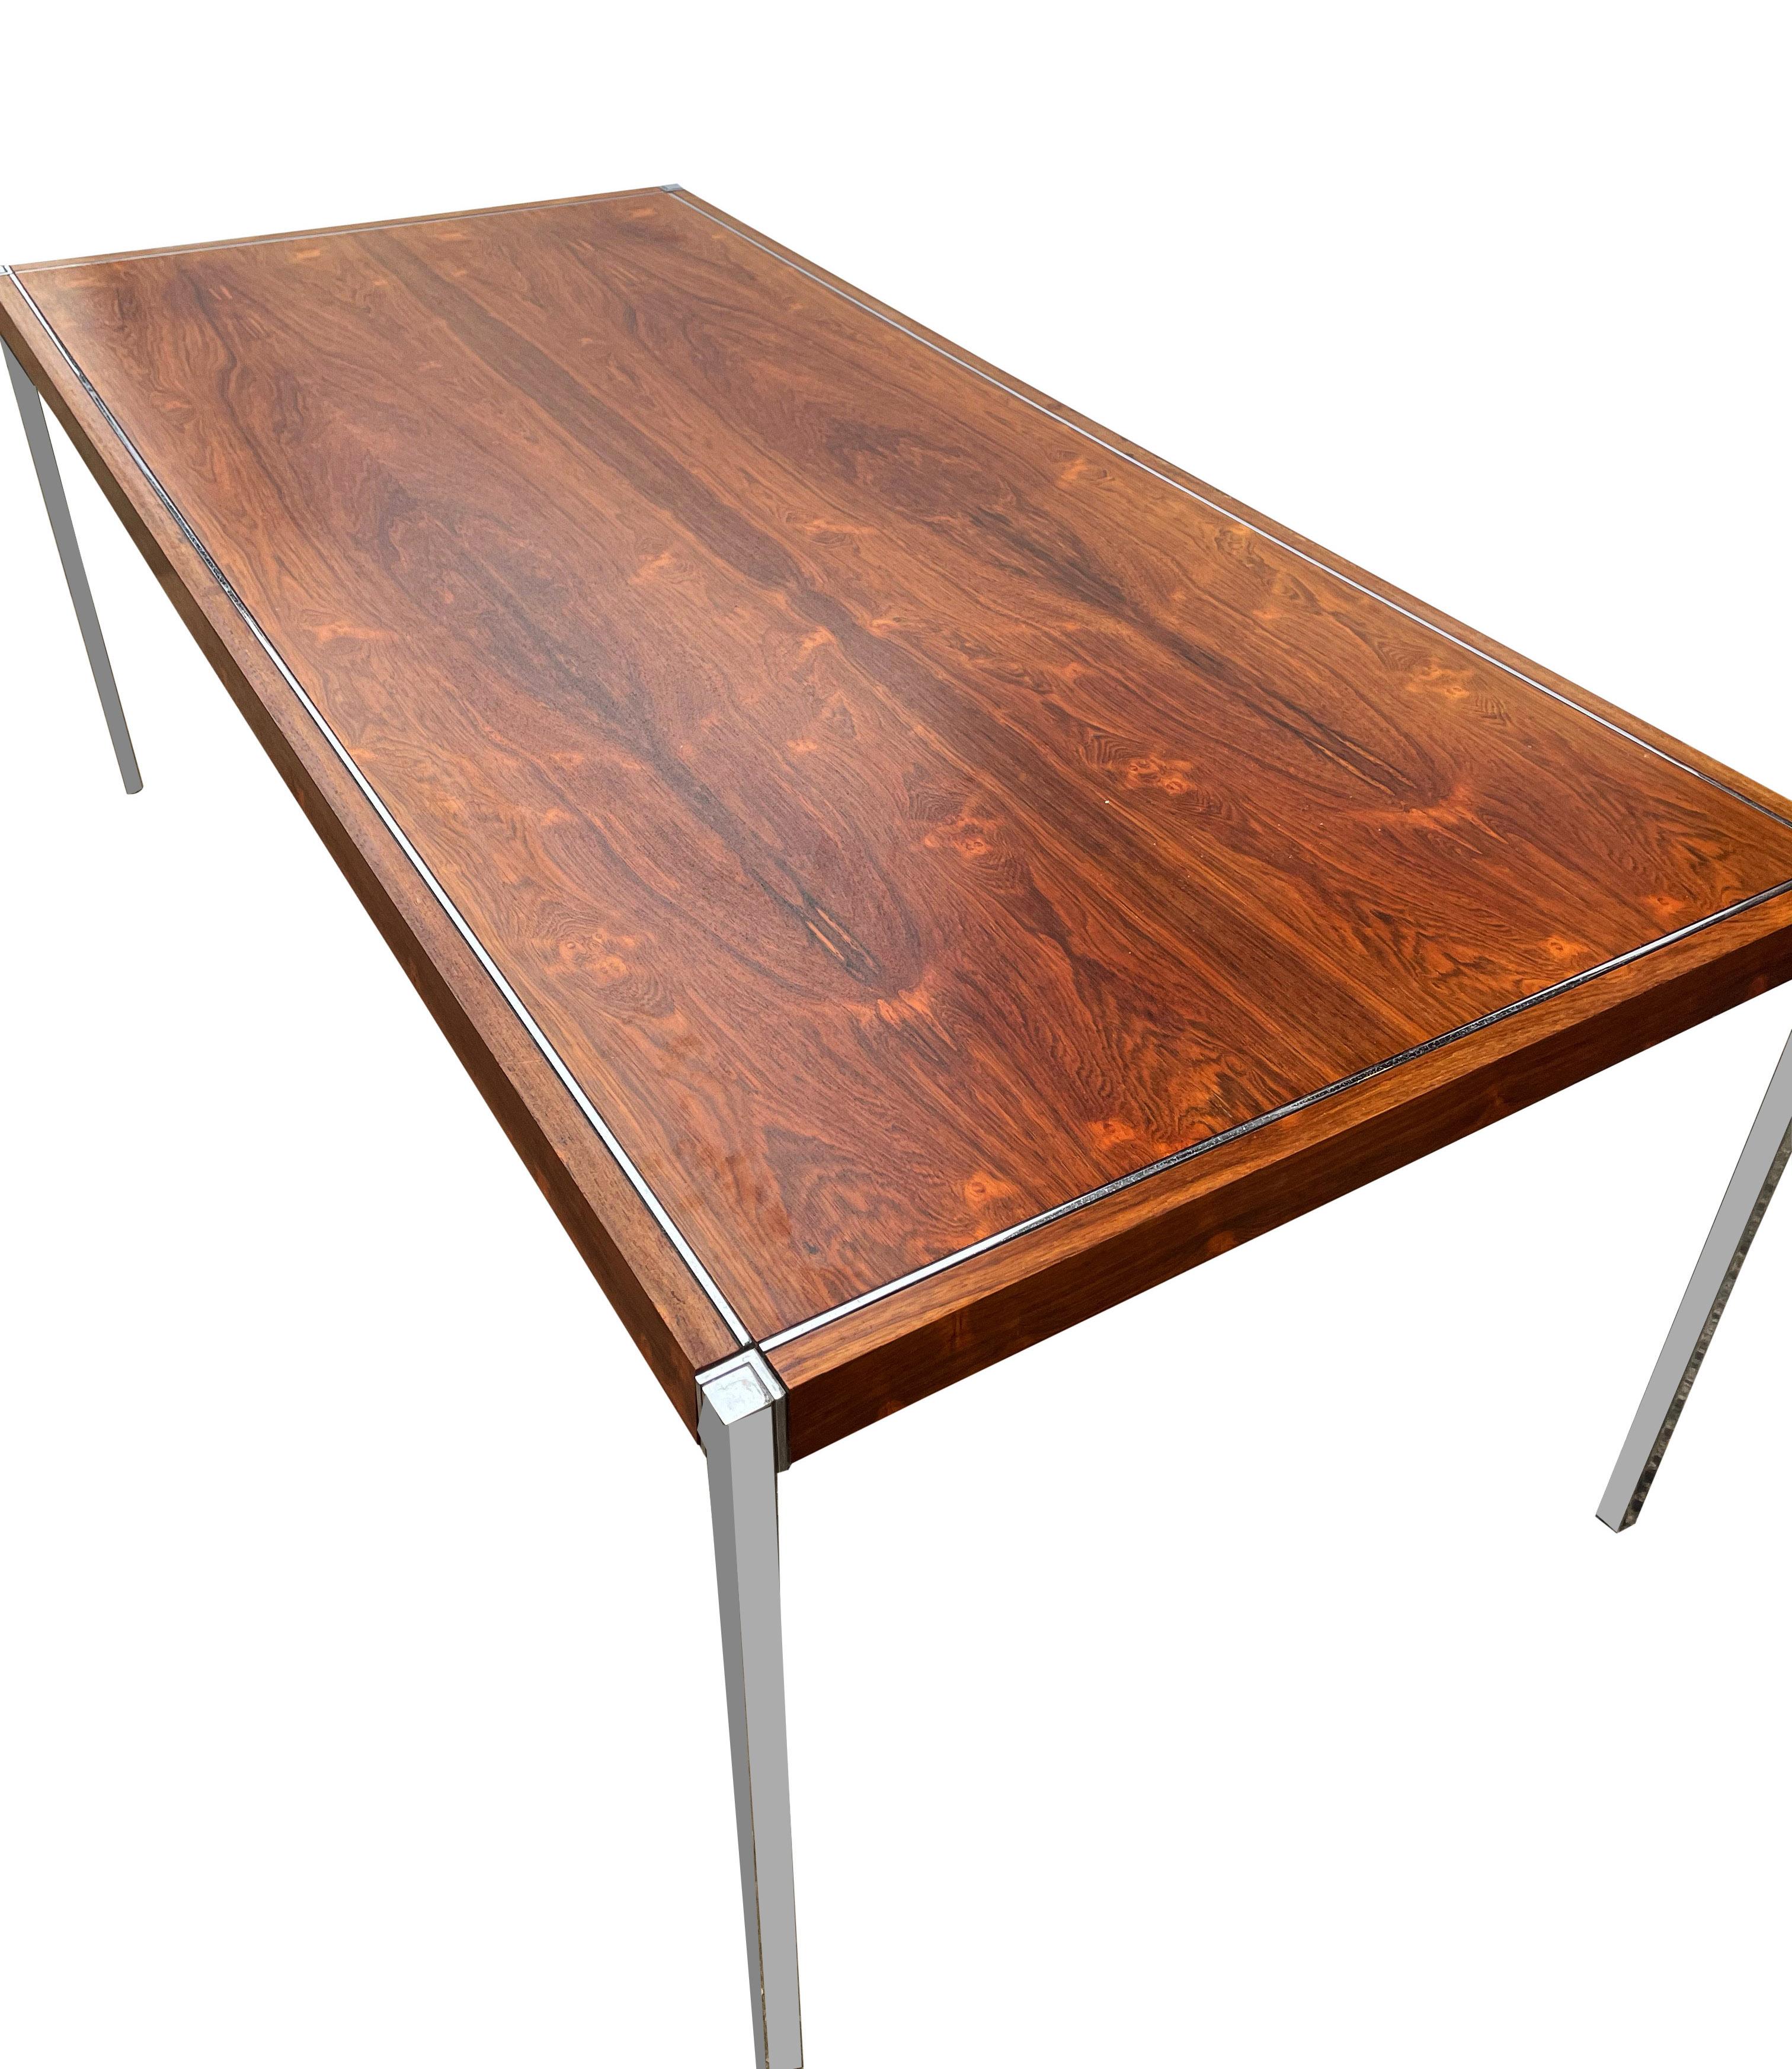 American Mid-Century Modern Richard Schultz Dining Table or Desk in Rosewood for Knoll